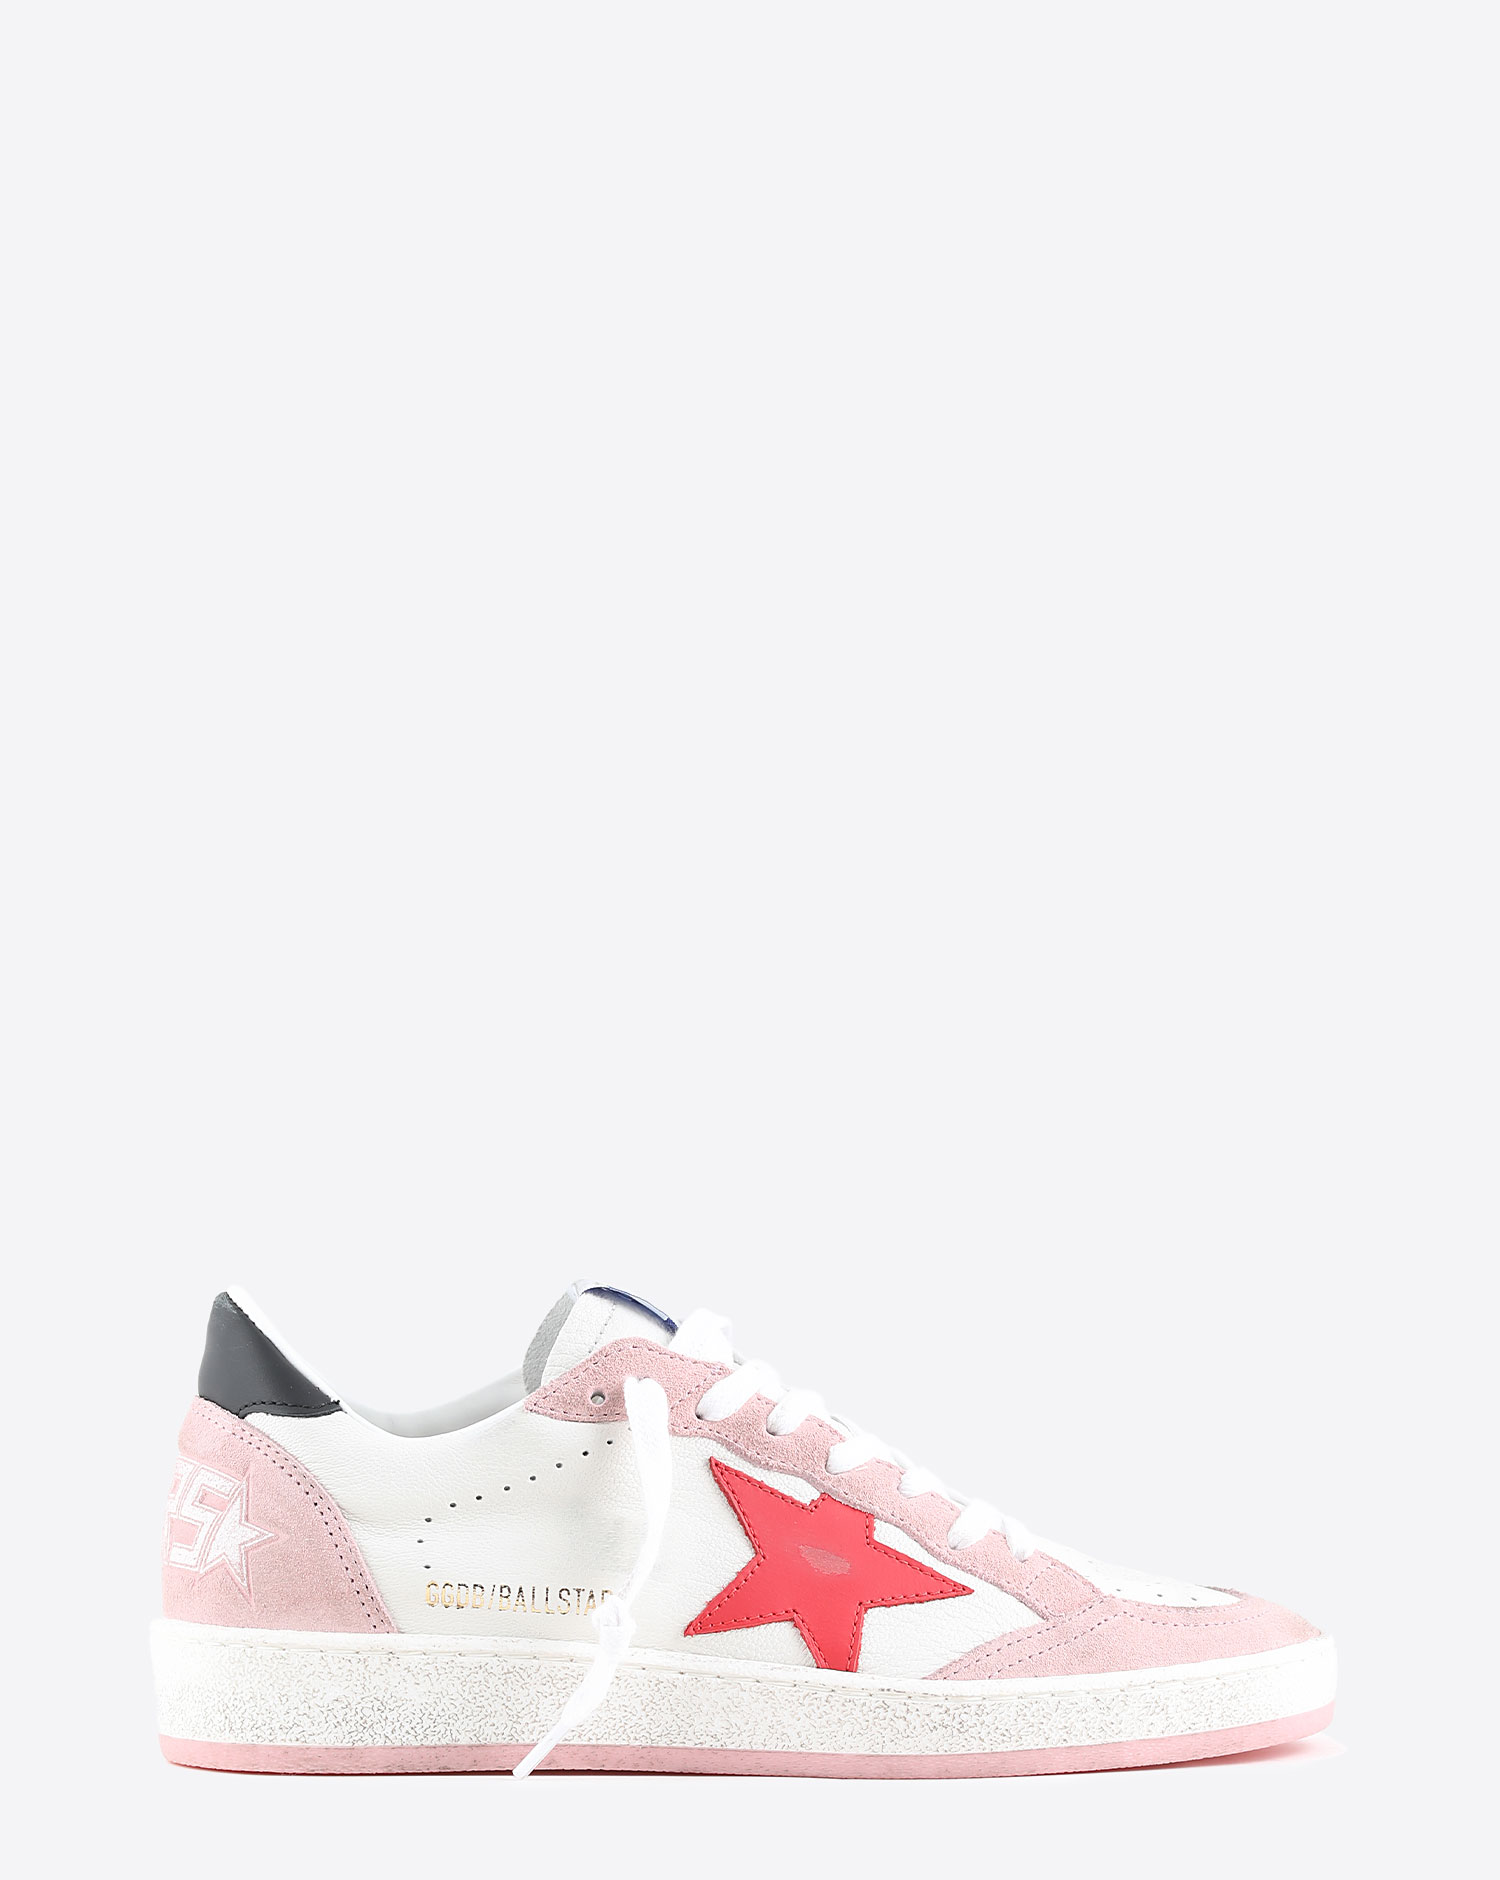 Sneakers Golden Goose Ball Star White Pink Red Black 10880. Profil.